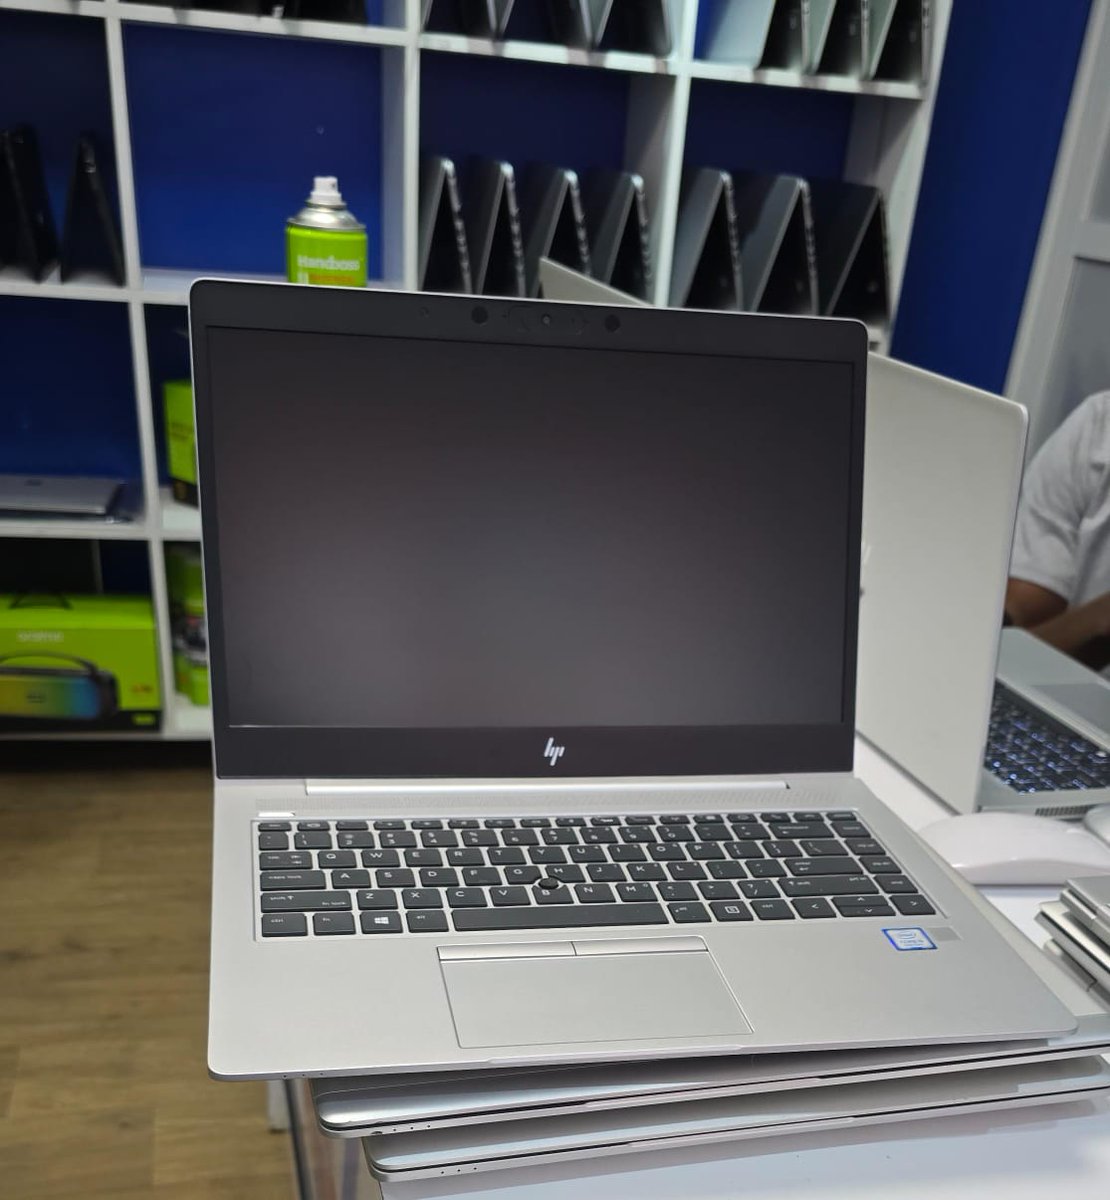 Get this Hp Elitebook 840 8th gen Processor Intel core i5 as low as Ksh 36,500 only Confirm best specs 😍👇 -Storage 8gb Ram/256GB SSD -Size 14 inches full hd -Speed upto 3.8ghz (8cpus) 📞0717040531 [Jose Mourinho Amber Ten Hag Olise Rongai Manchester United Girona]